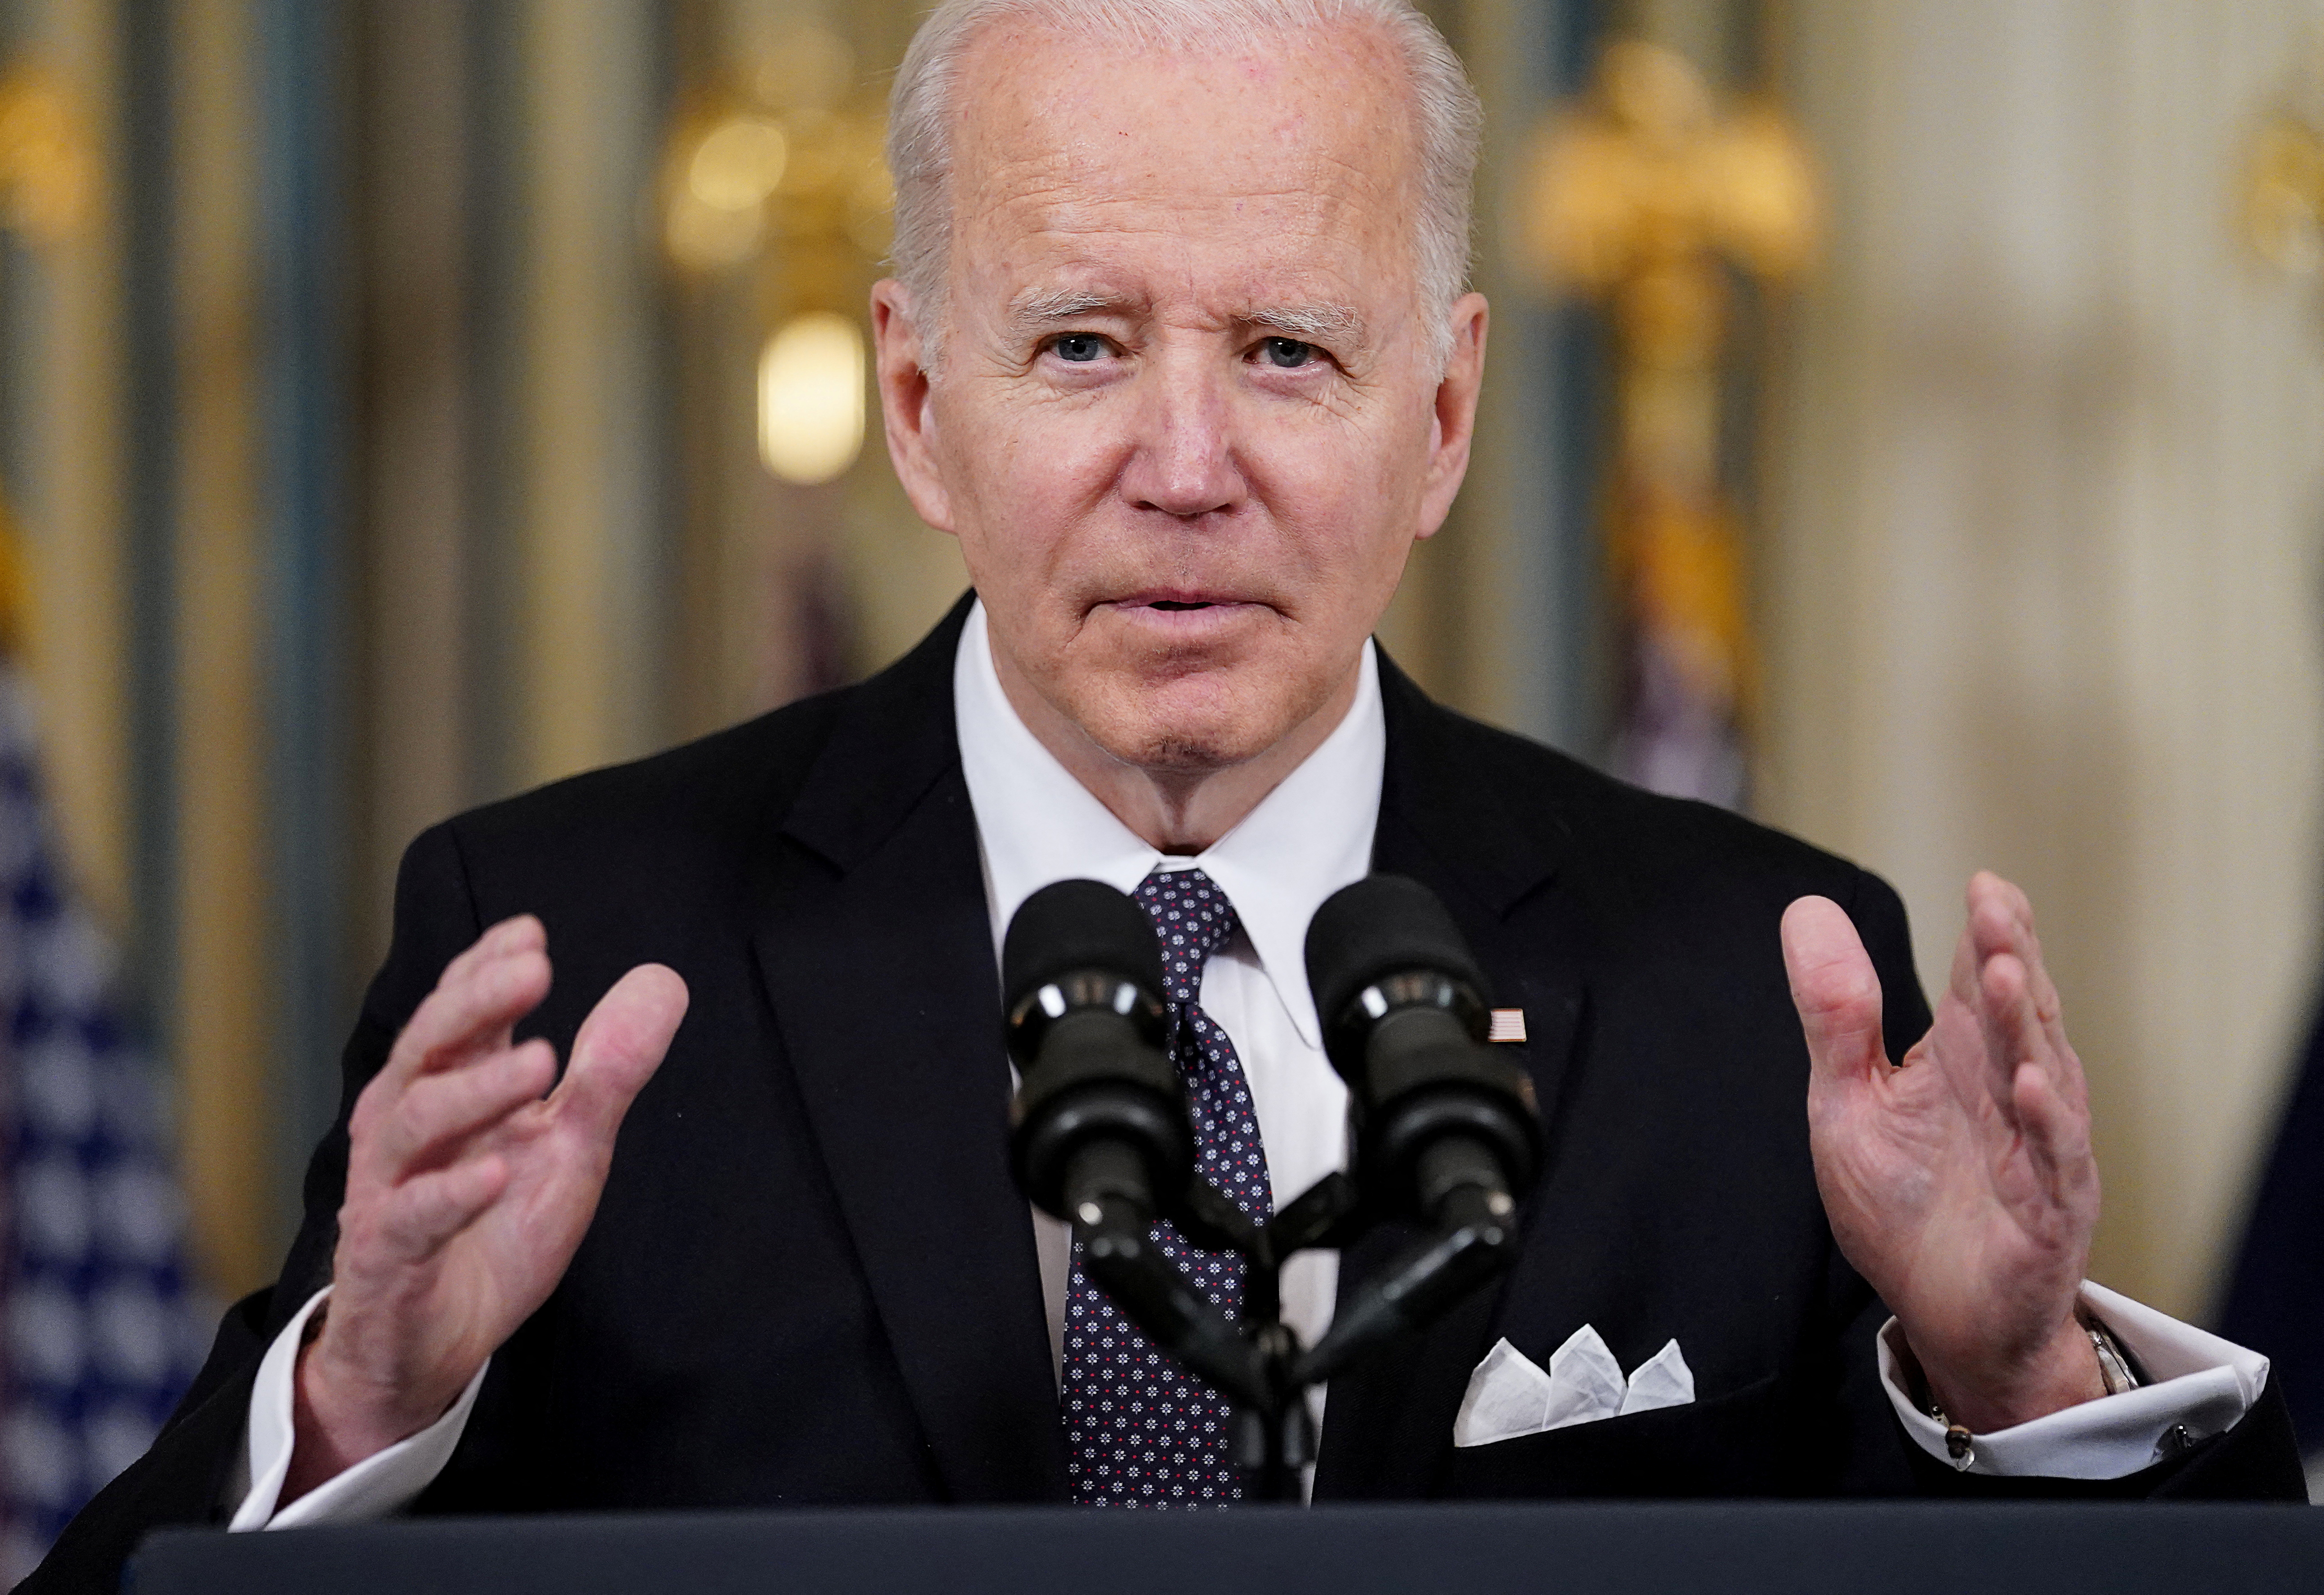 U.S. President Joe Biden announces proposed budget for fiscal year 2023 at the White House in Washington